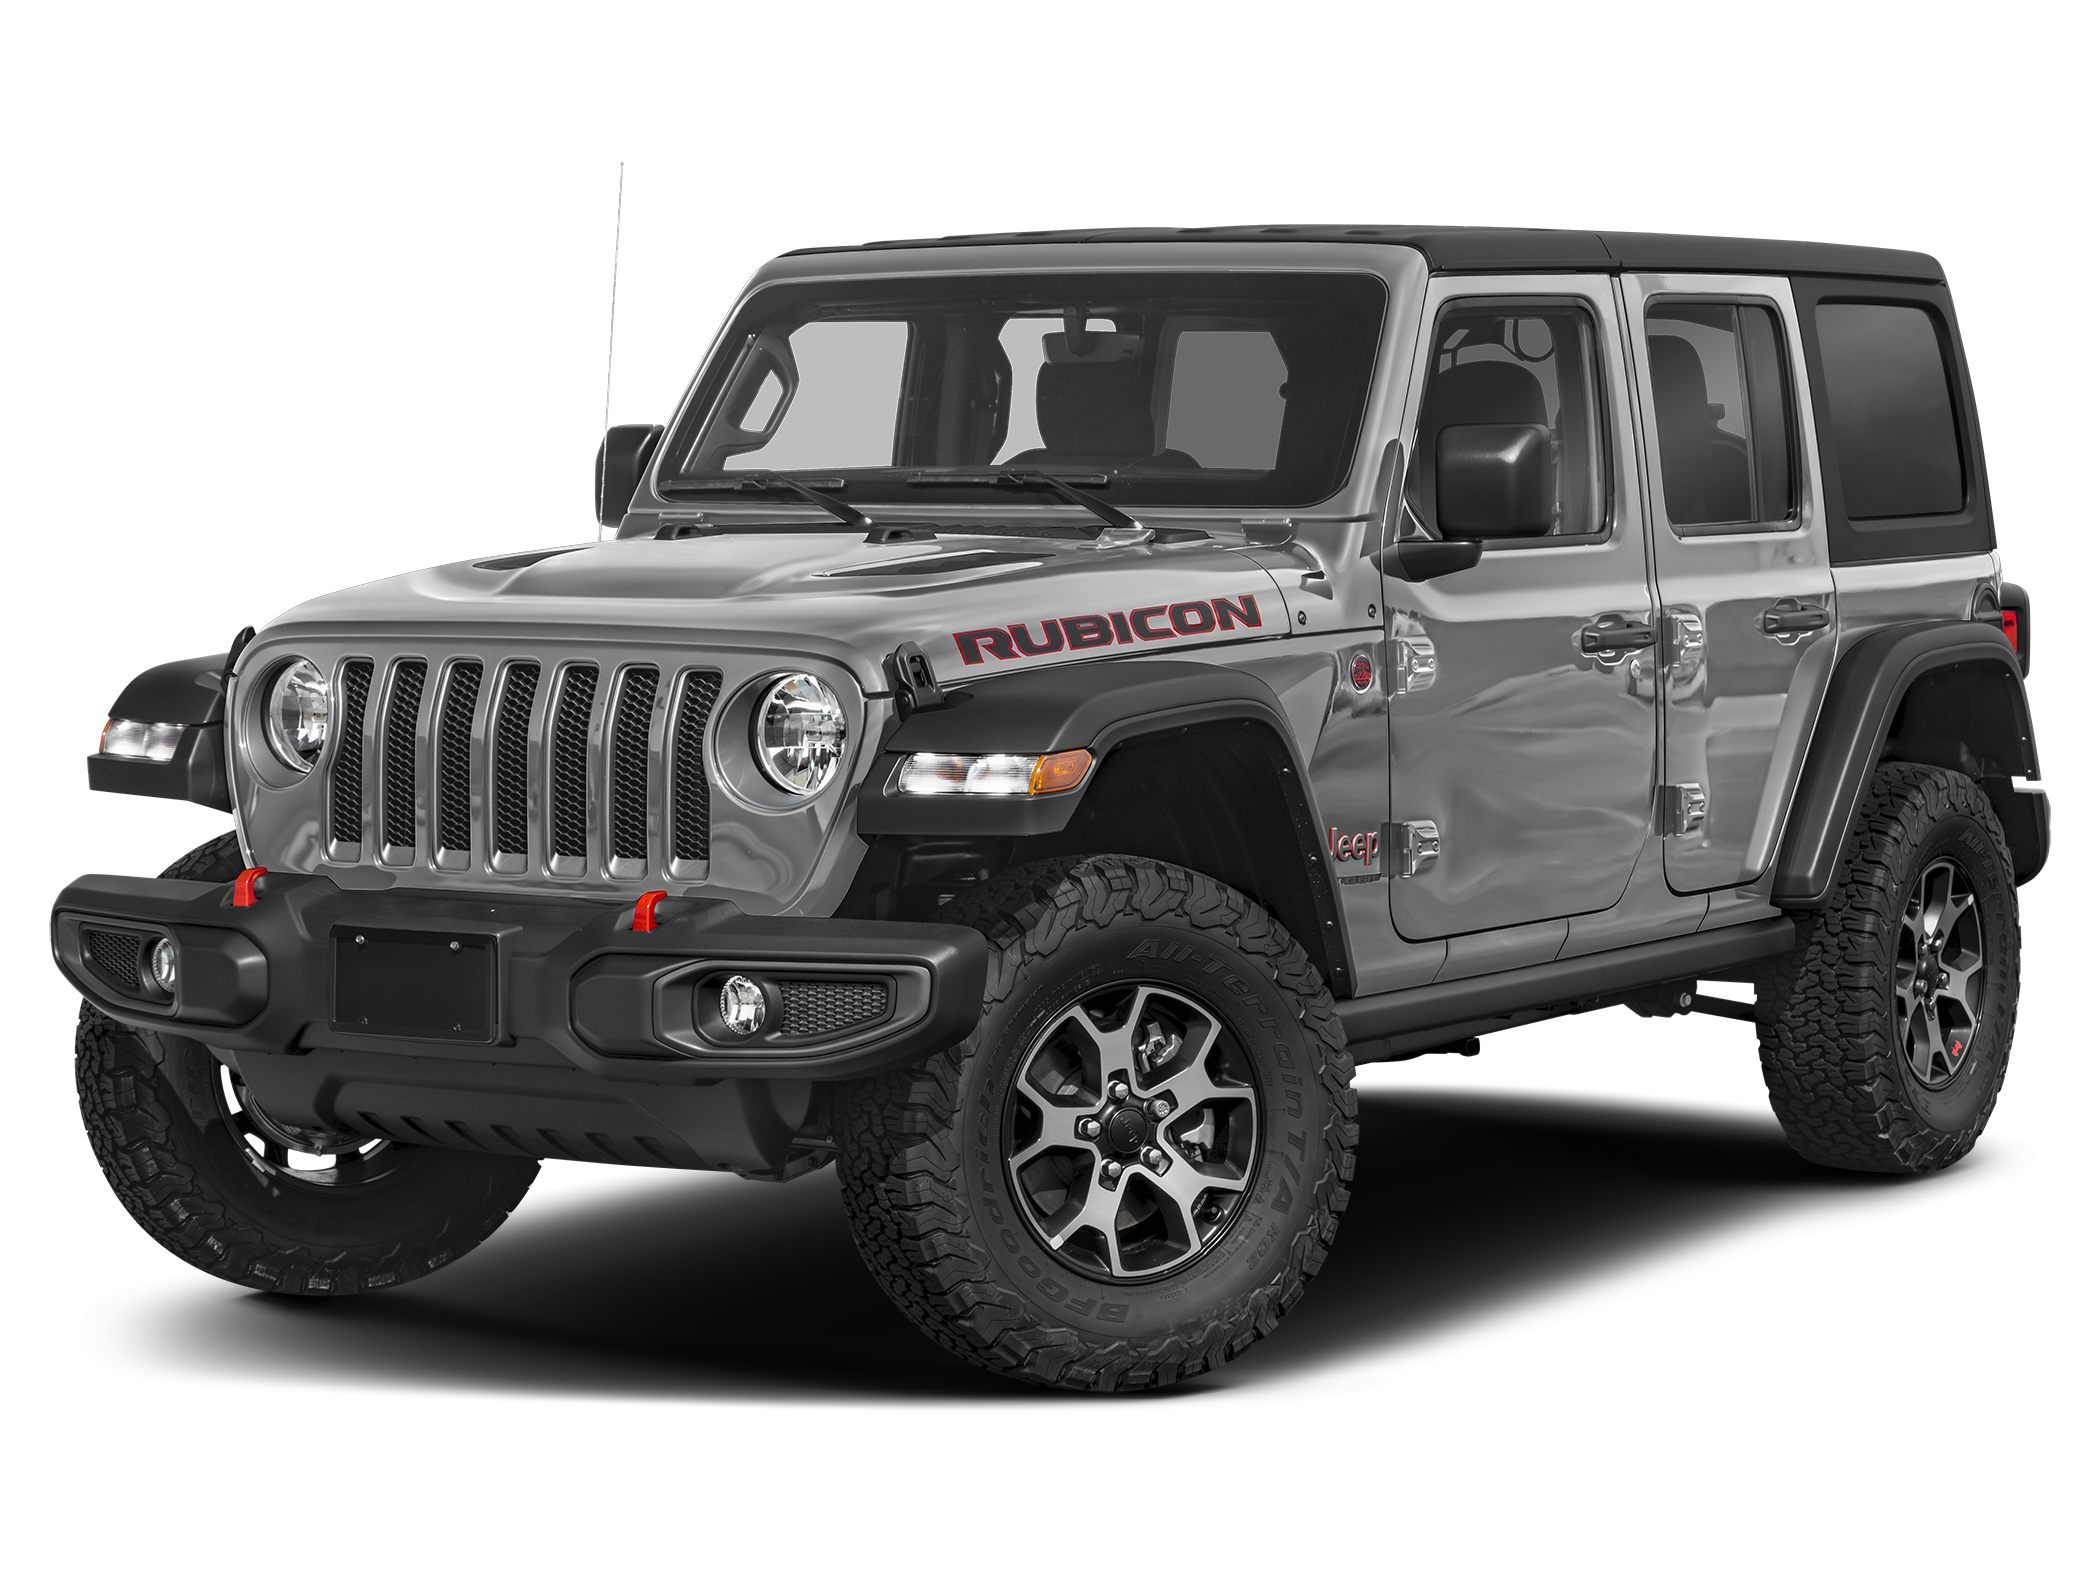 New 2023 Jeep Wrangler 4-DOOR RUBICON 4X4 For Sale in Bronx, NY | Near  Manhattan, Queens, & Westchester County, NY | VIN:1C4JJXFM9PW589576